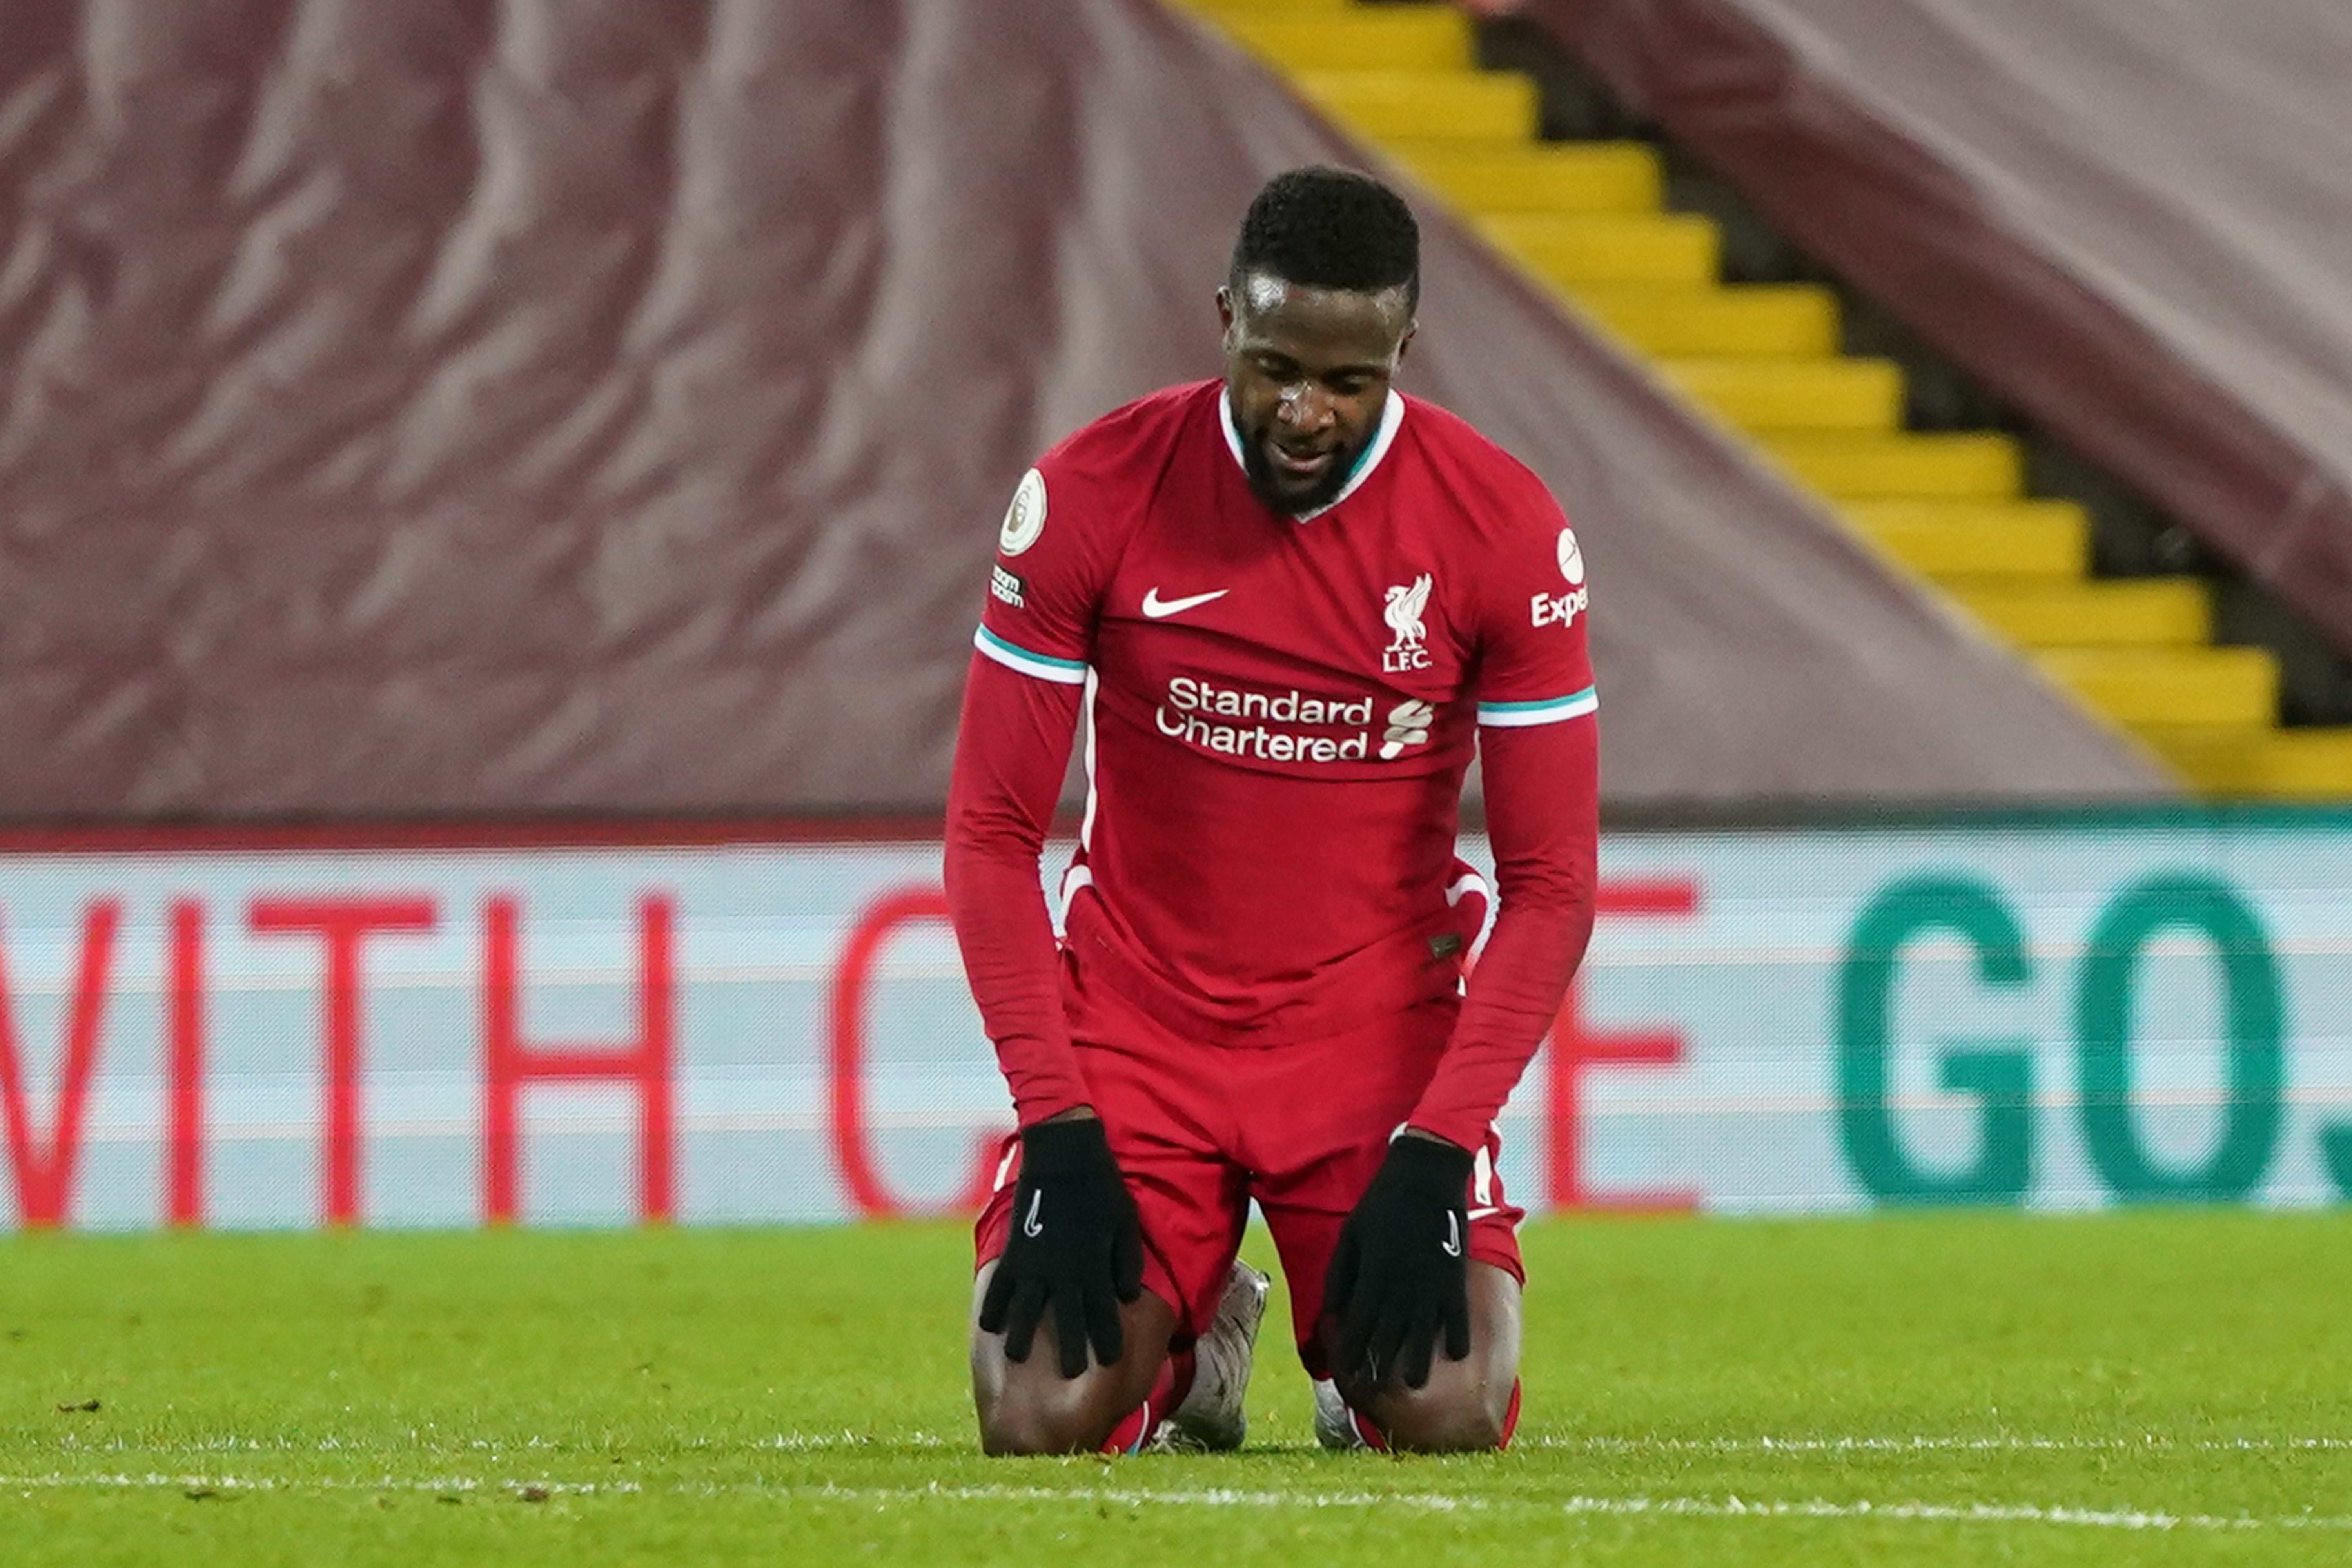 Divock Origi missed a fantastic one-on-one chance